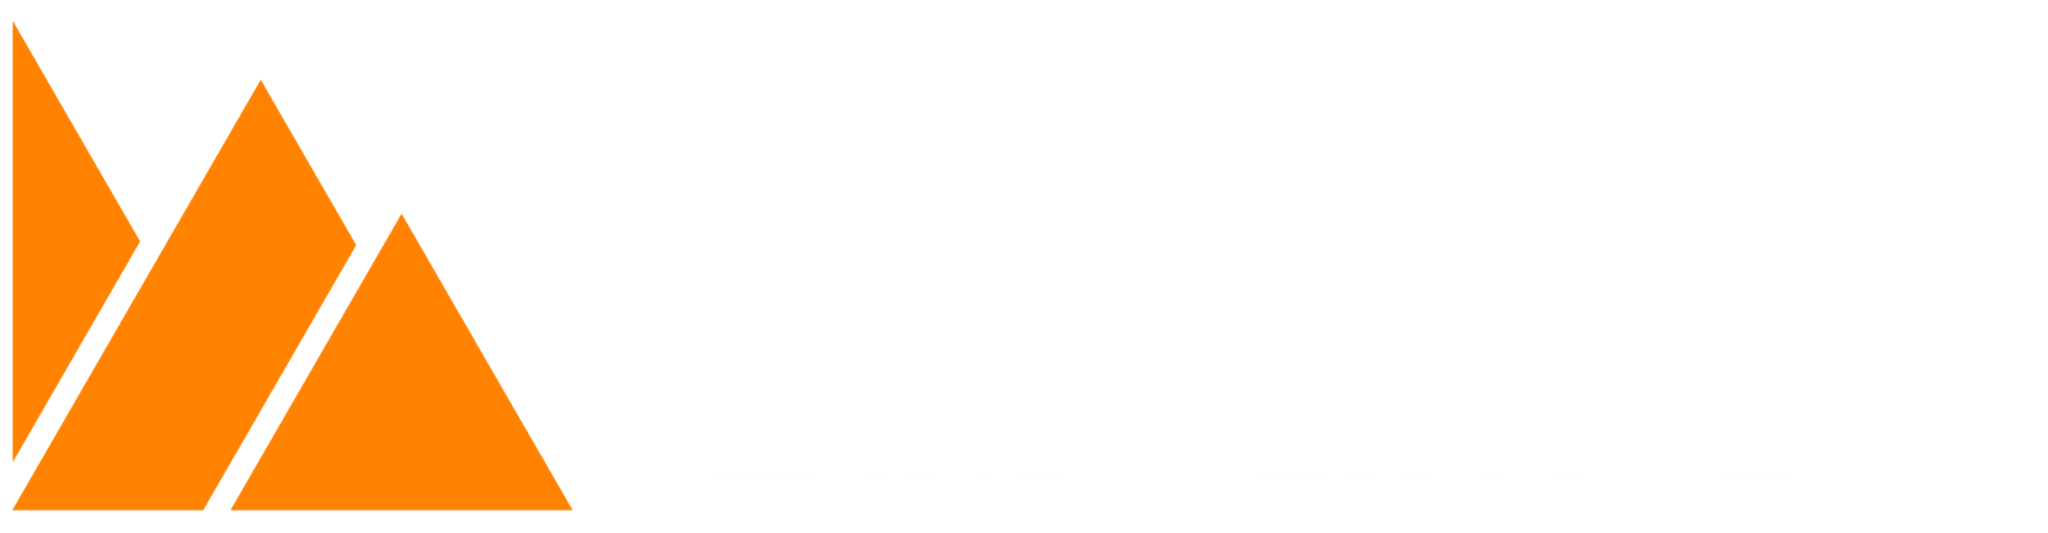 Bear Claw Land Services site logo